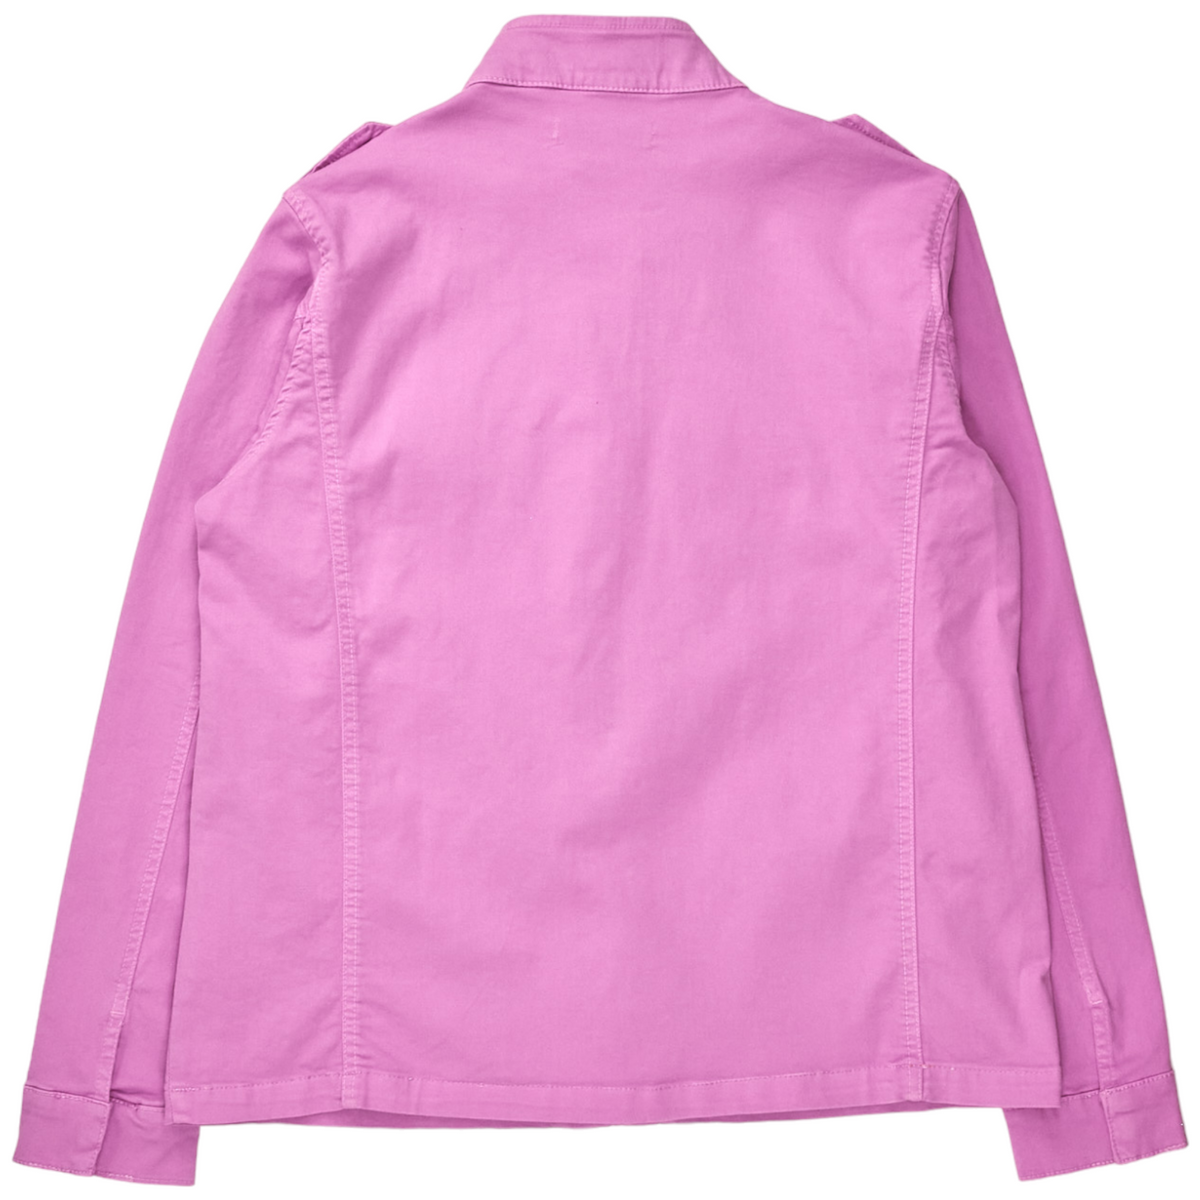 NRBY Pink Monica Utility Jacket